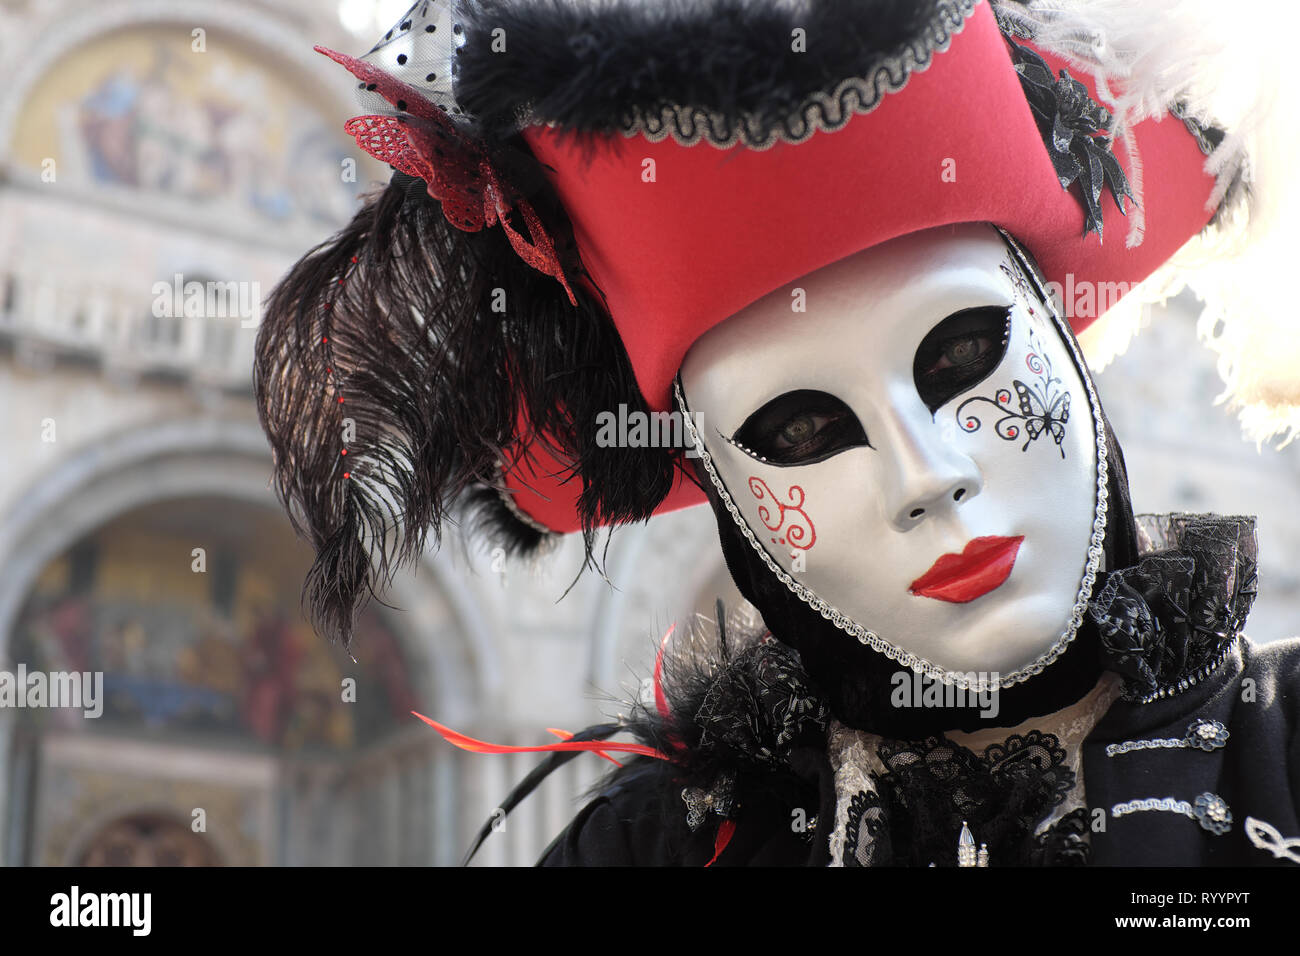 Man dressed in traditional mask and costume for Venice Carnival standing in Piazza San Marco in front of Saint Mark's Basilica, Venice, Veneto, Italy Stock Photo